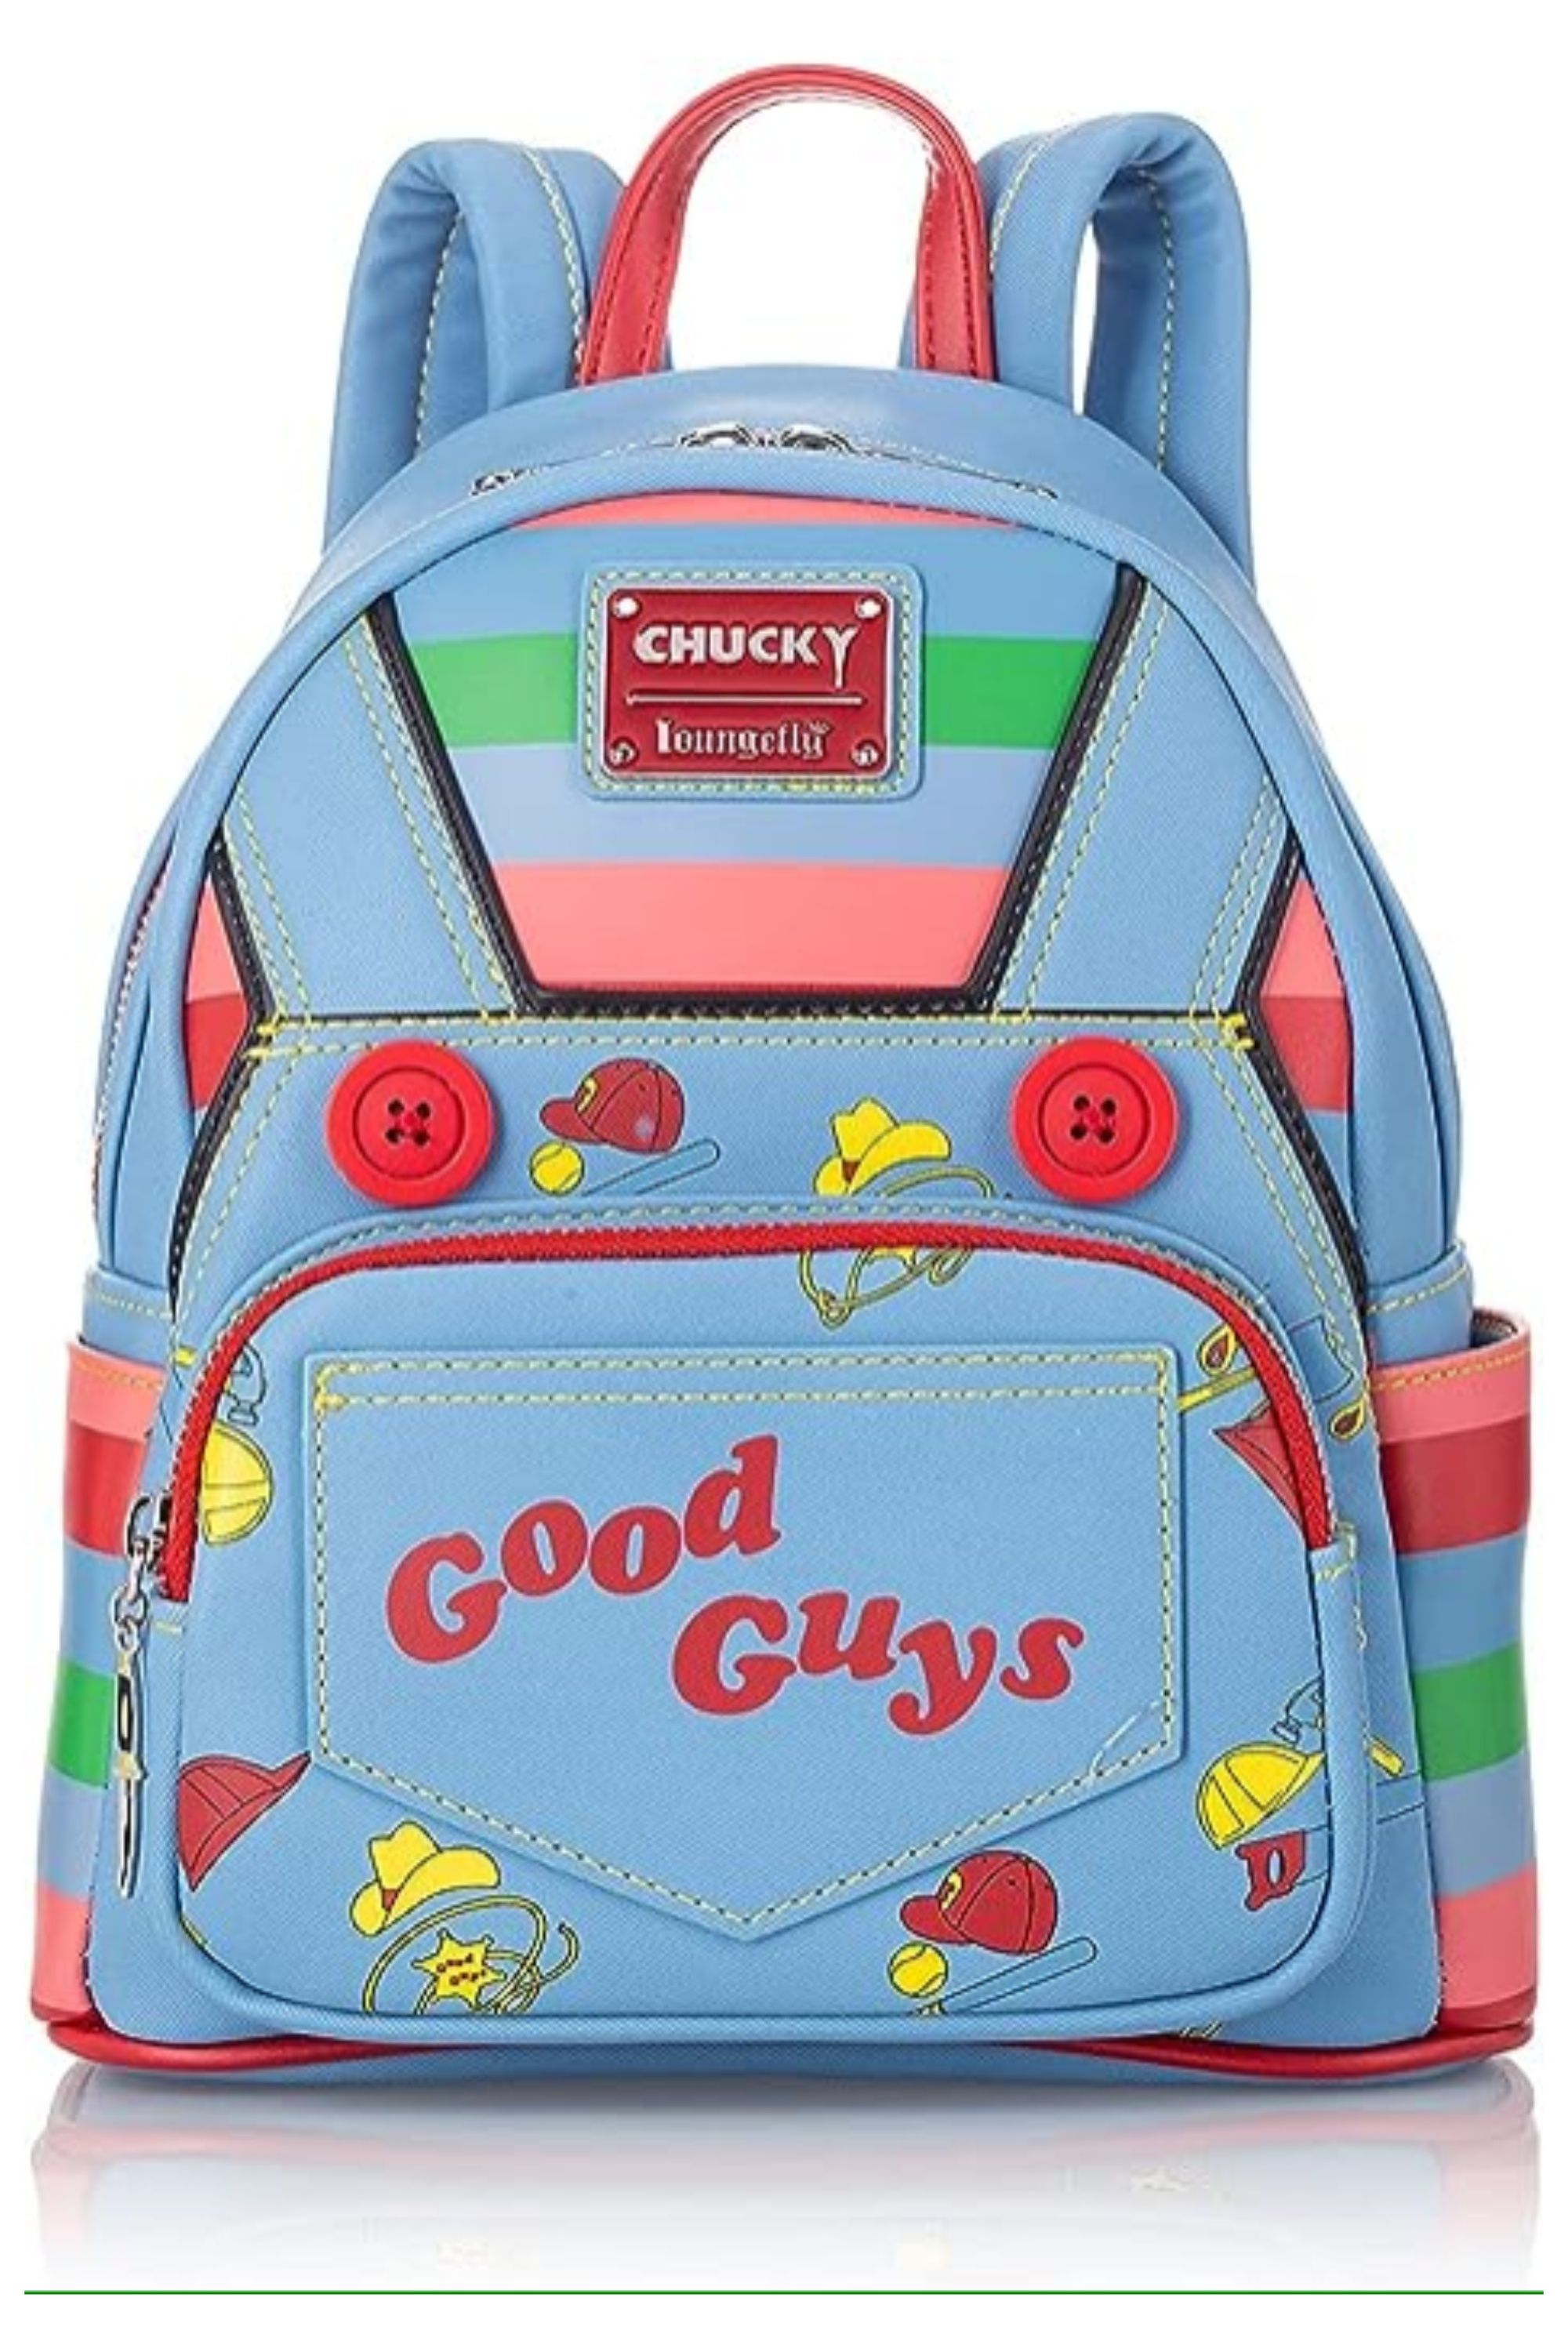 Child's Play Chucky Loungefly Backpack